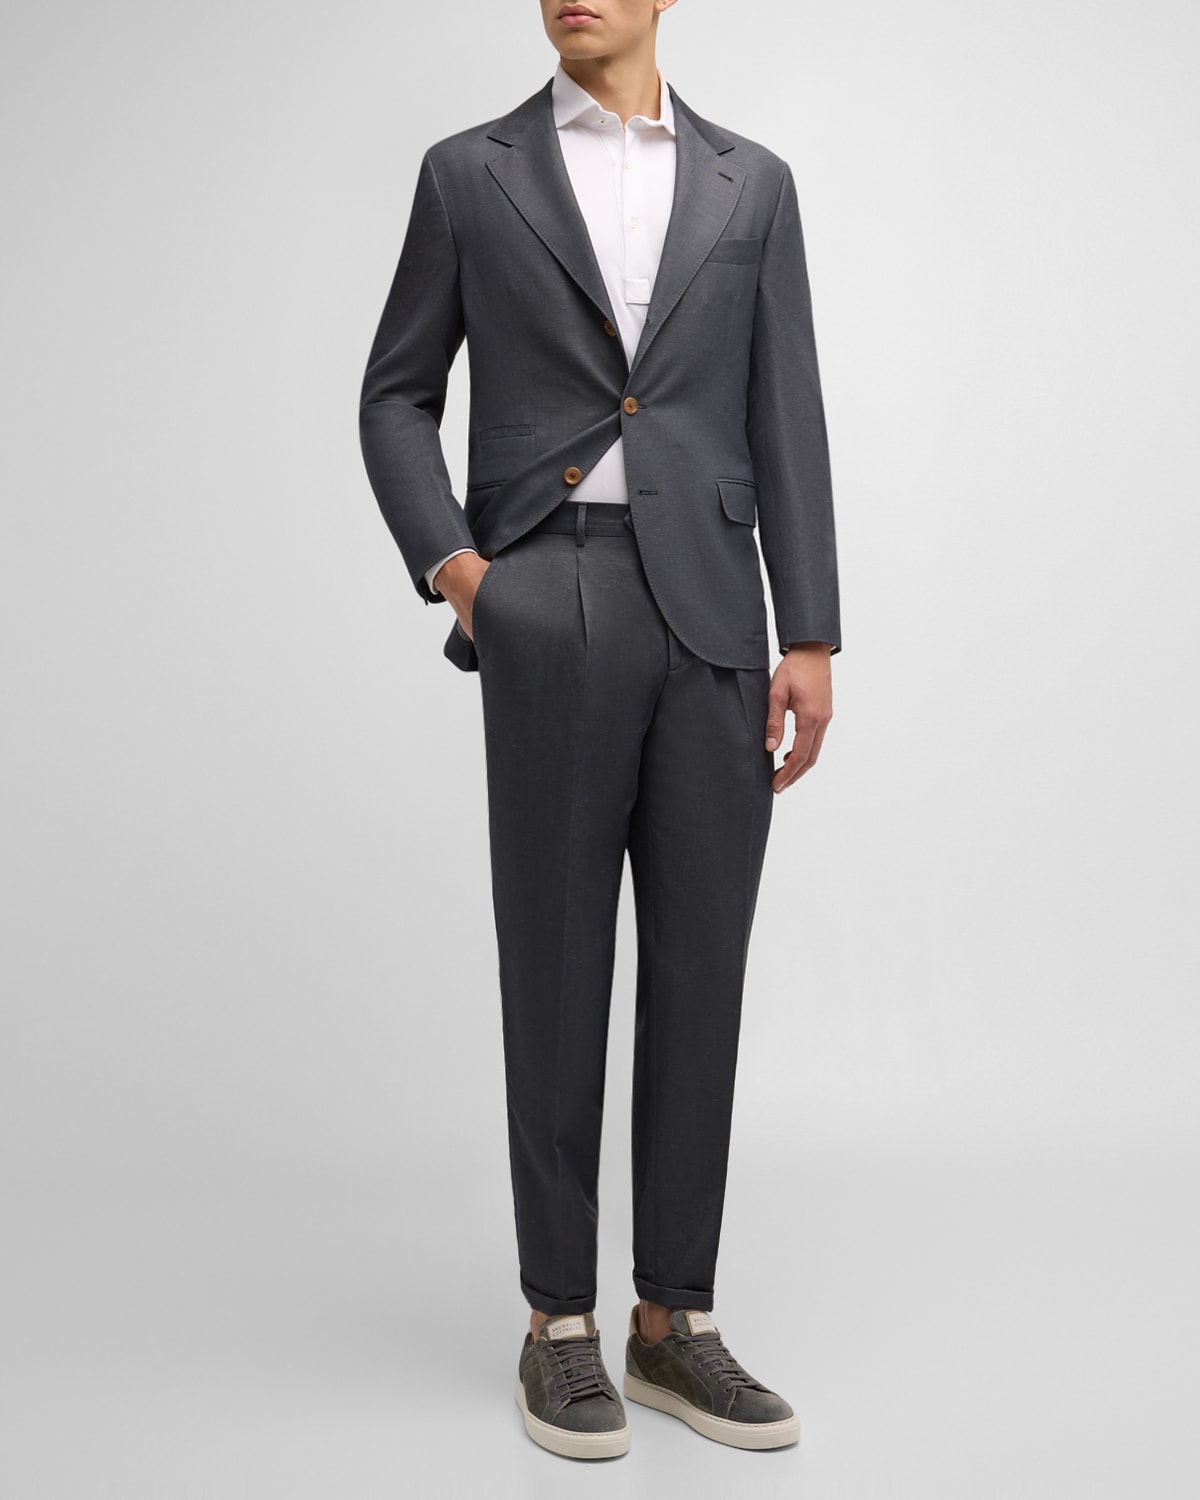 Men's Wool and Linen Three-Button Suit